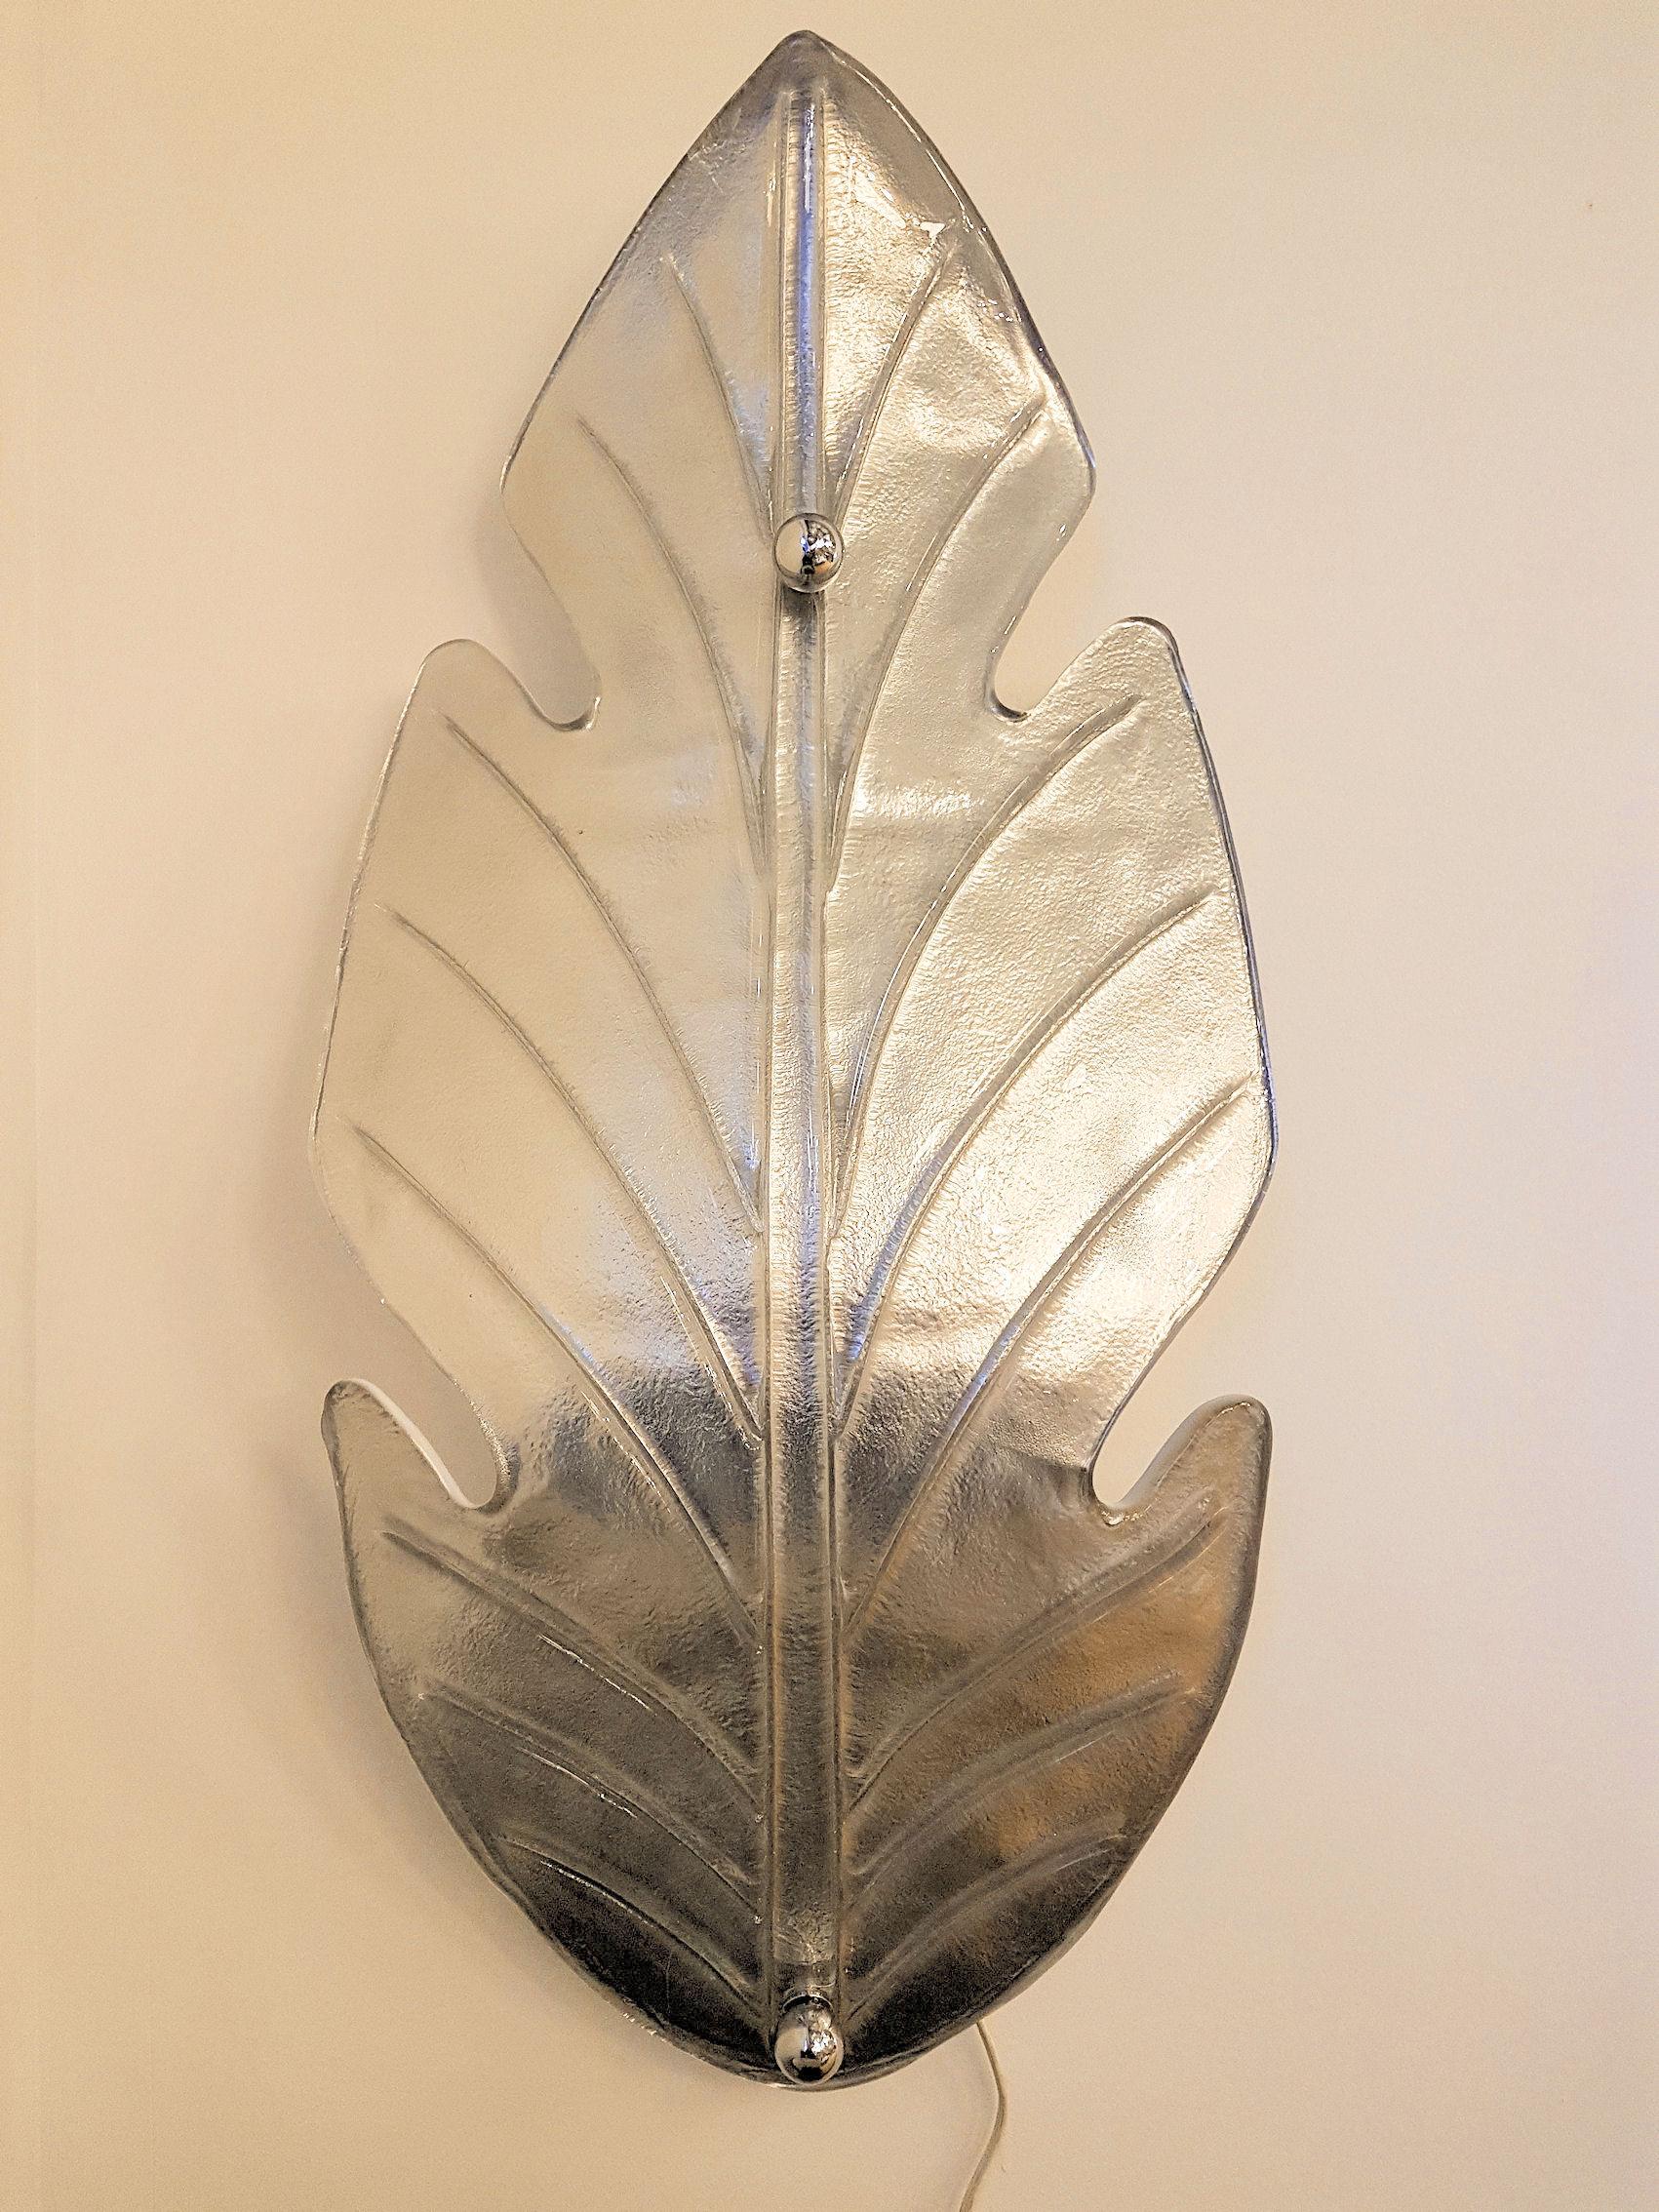 Extra large pair of Mid-Century Modern leaf shaped, silver Murano glass sconces.
Attributed to E. Barovier, Italy, circa 1970s.
Made of one unique piece of Murano glass, silver w/a mirror effect color outside, and white inside.
Opaque when light is